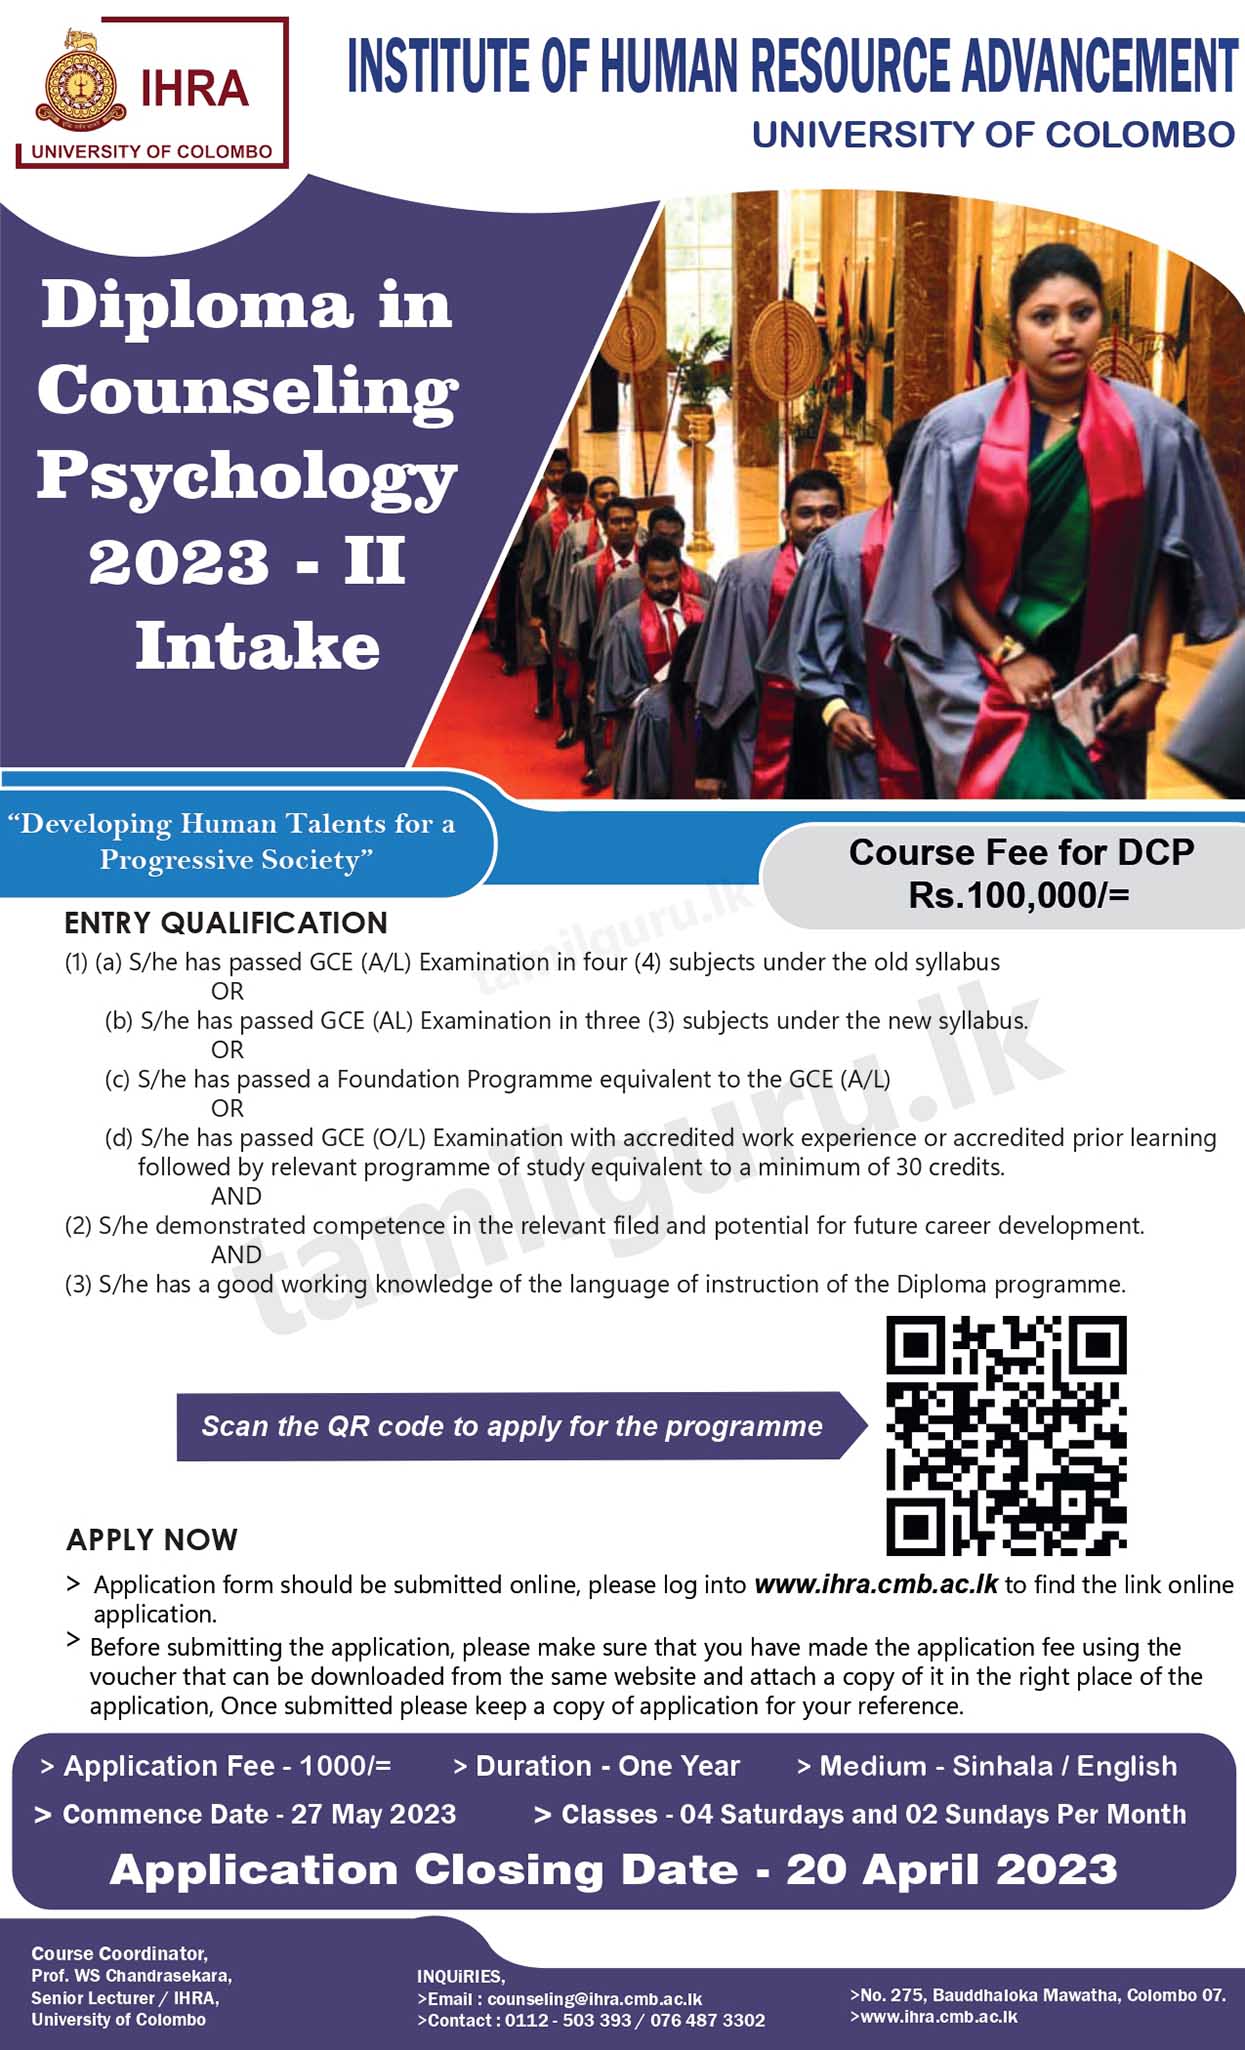 Diploma in Counseling Psychology (DCP) Course (2023 Intake - II) - University of Colombo